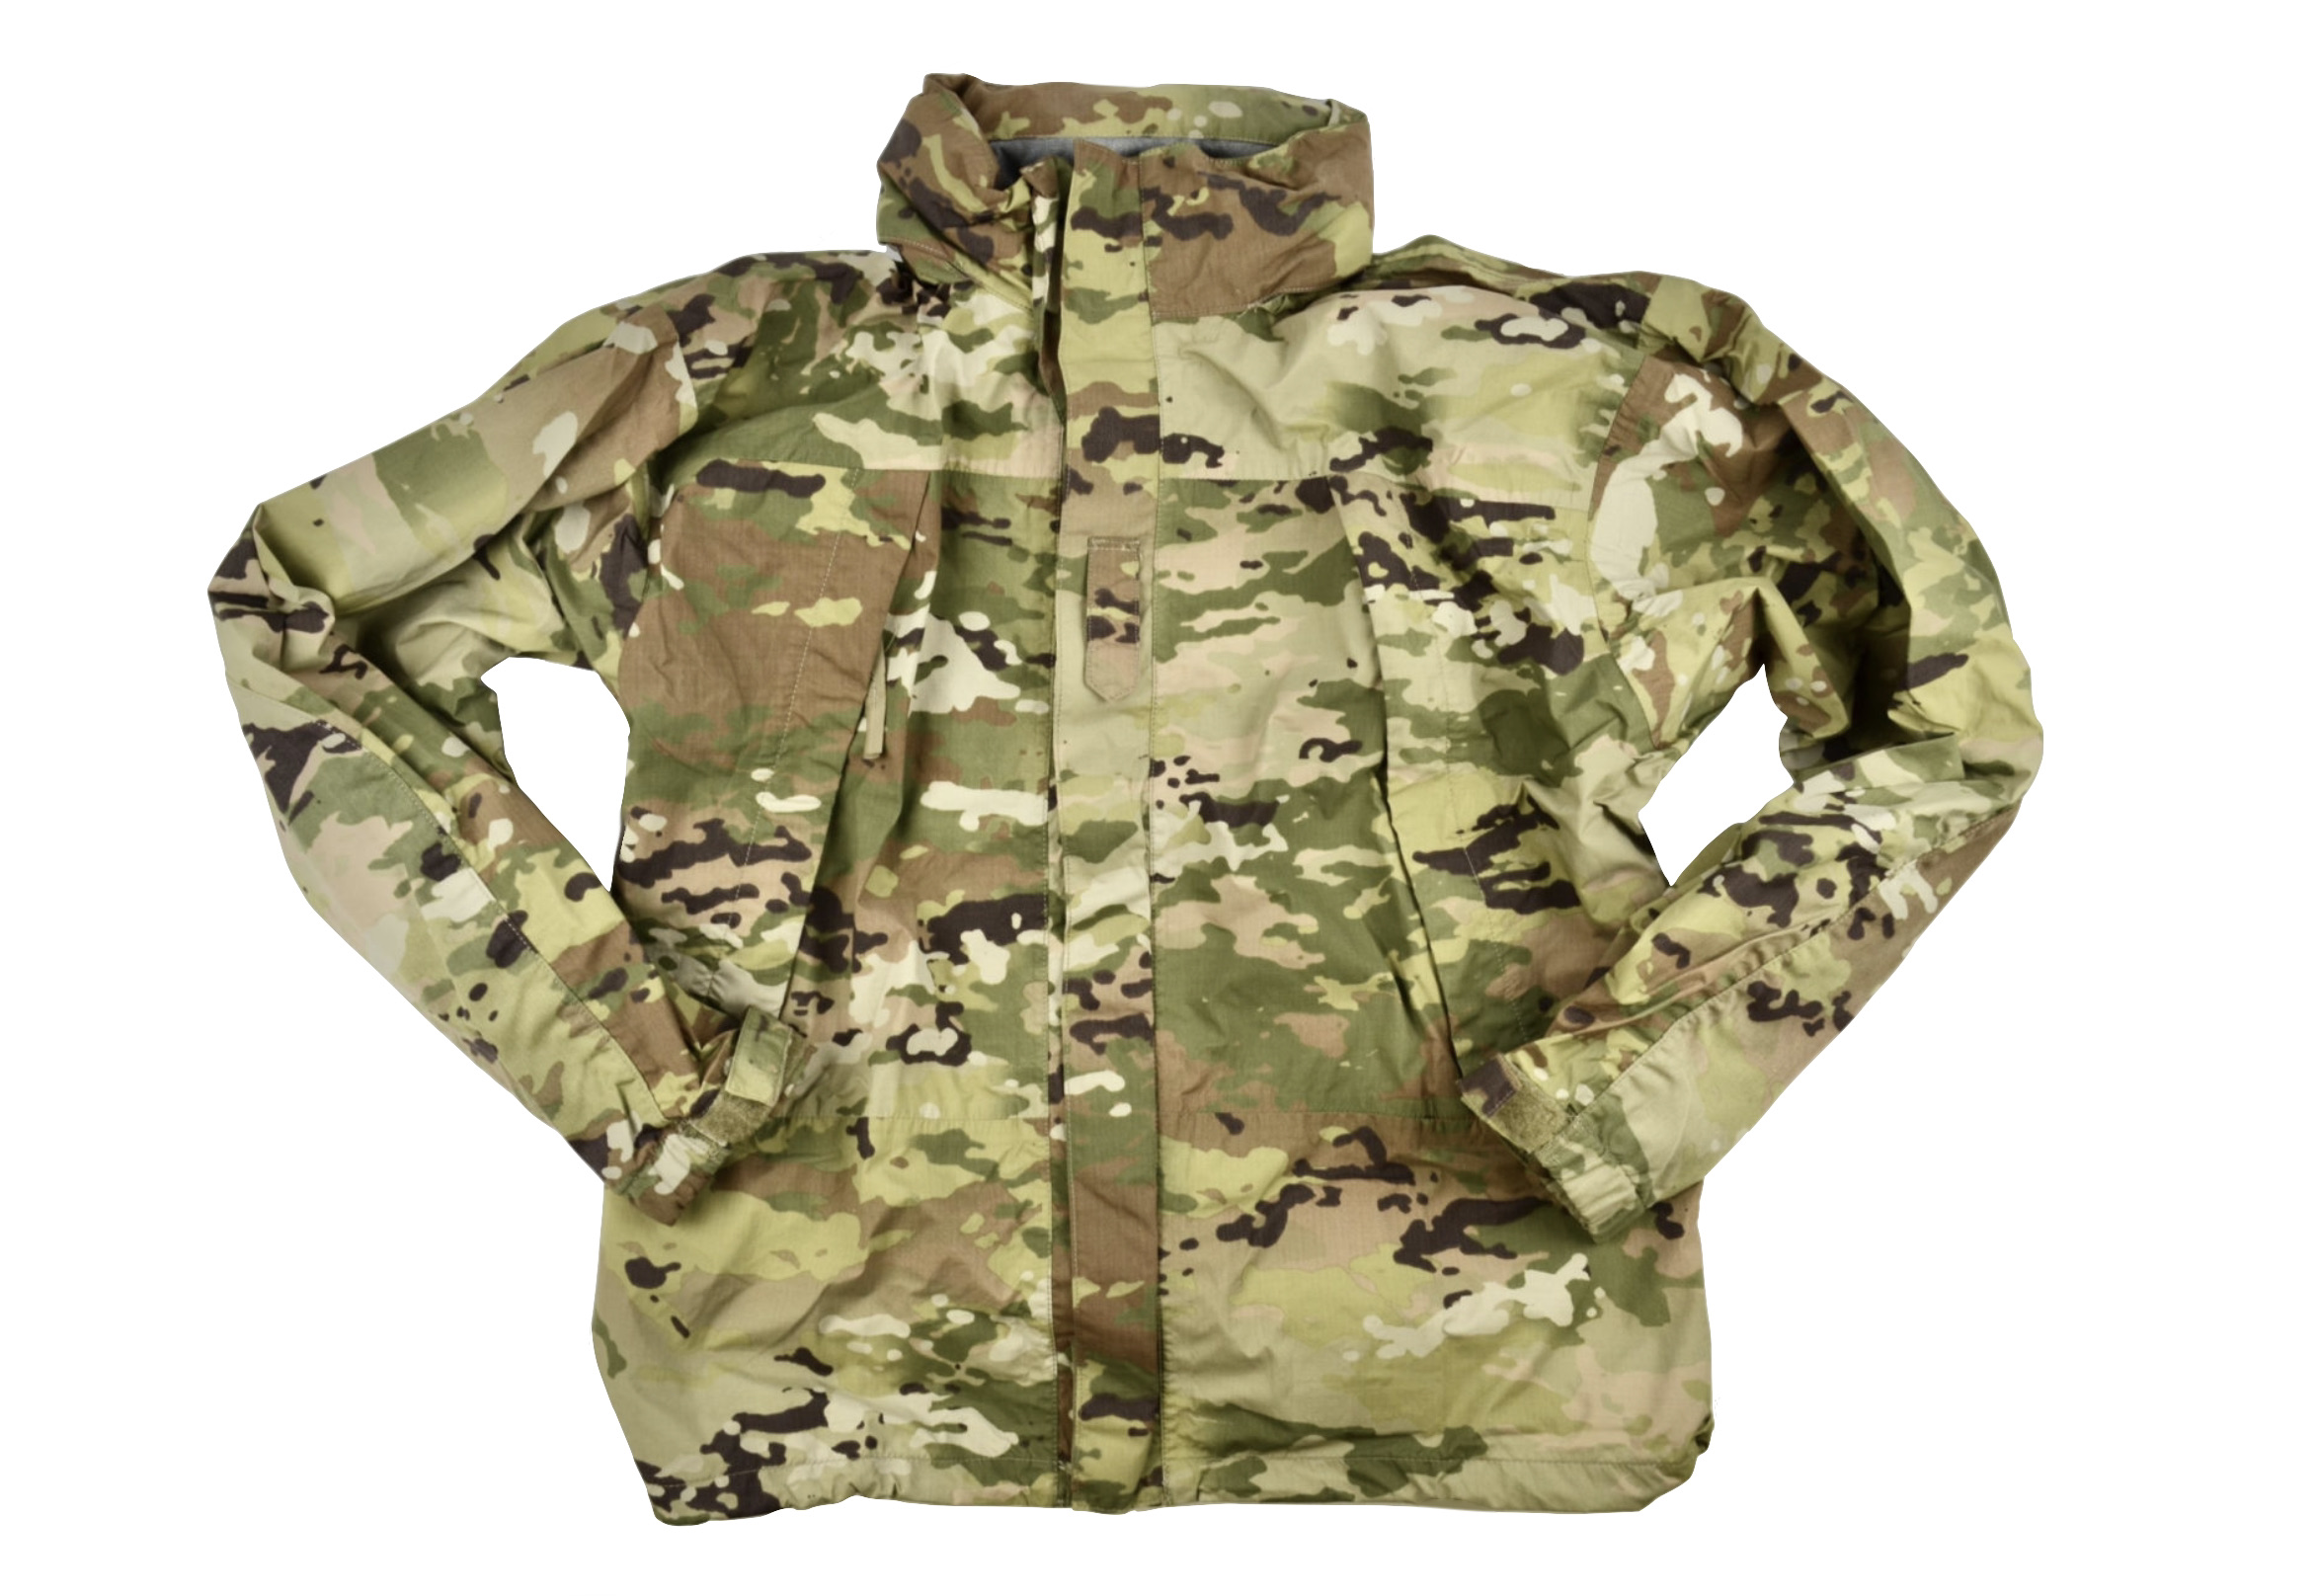 Cold Weather Gear Ocp - Lodge State